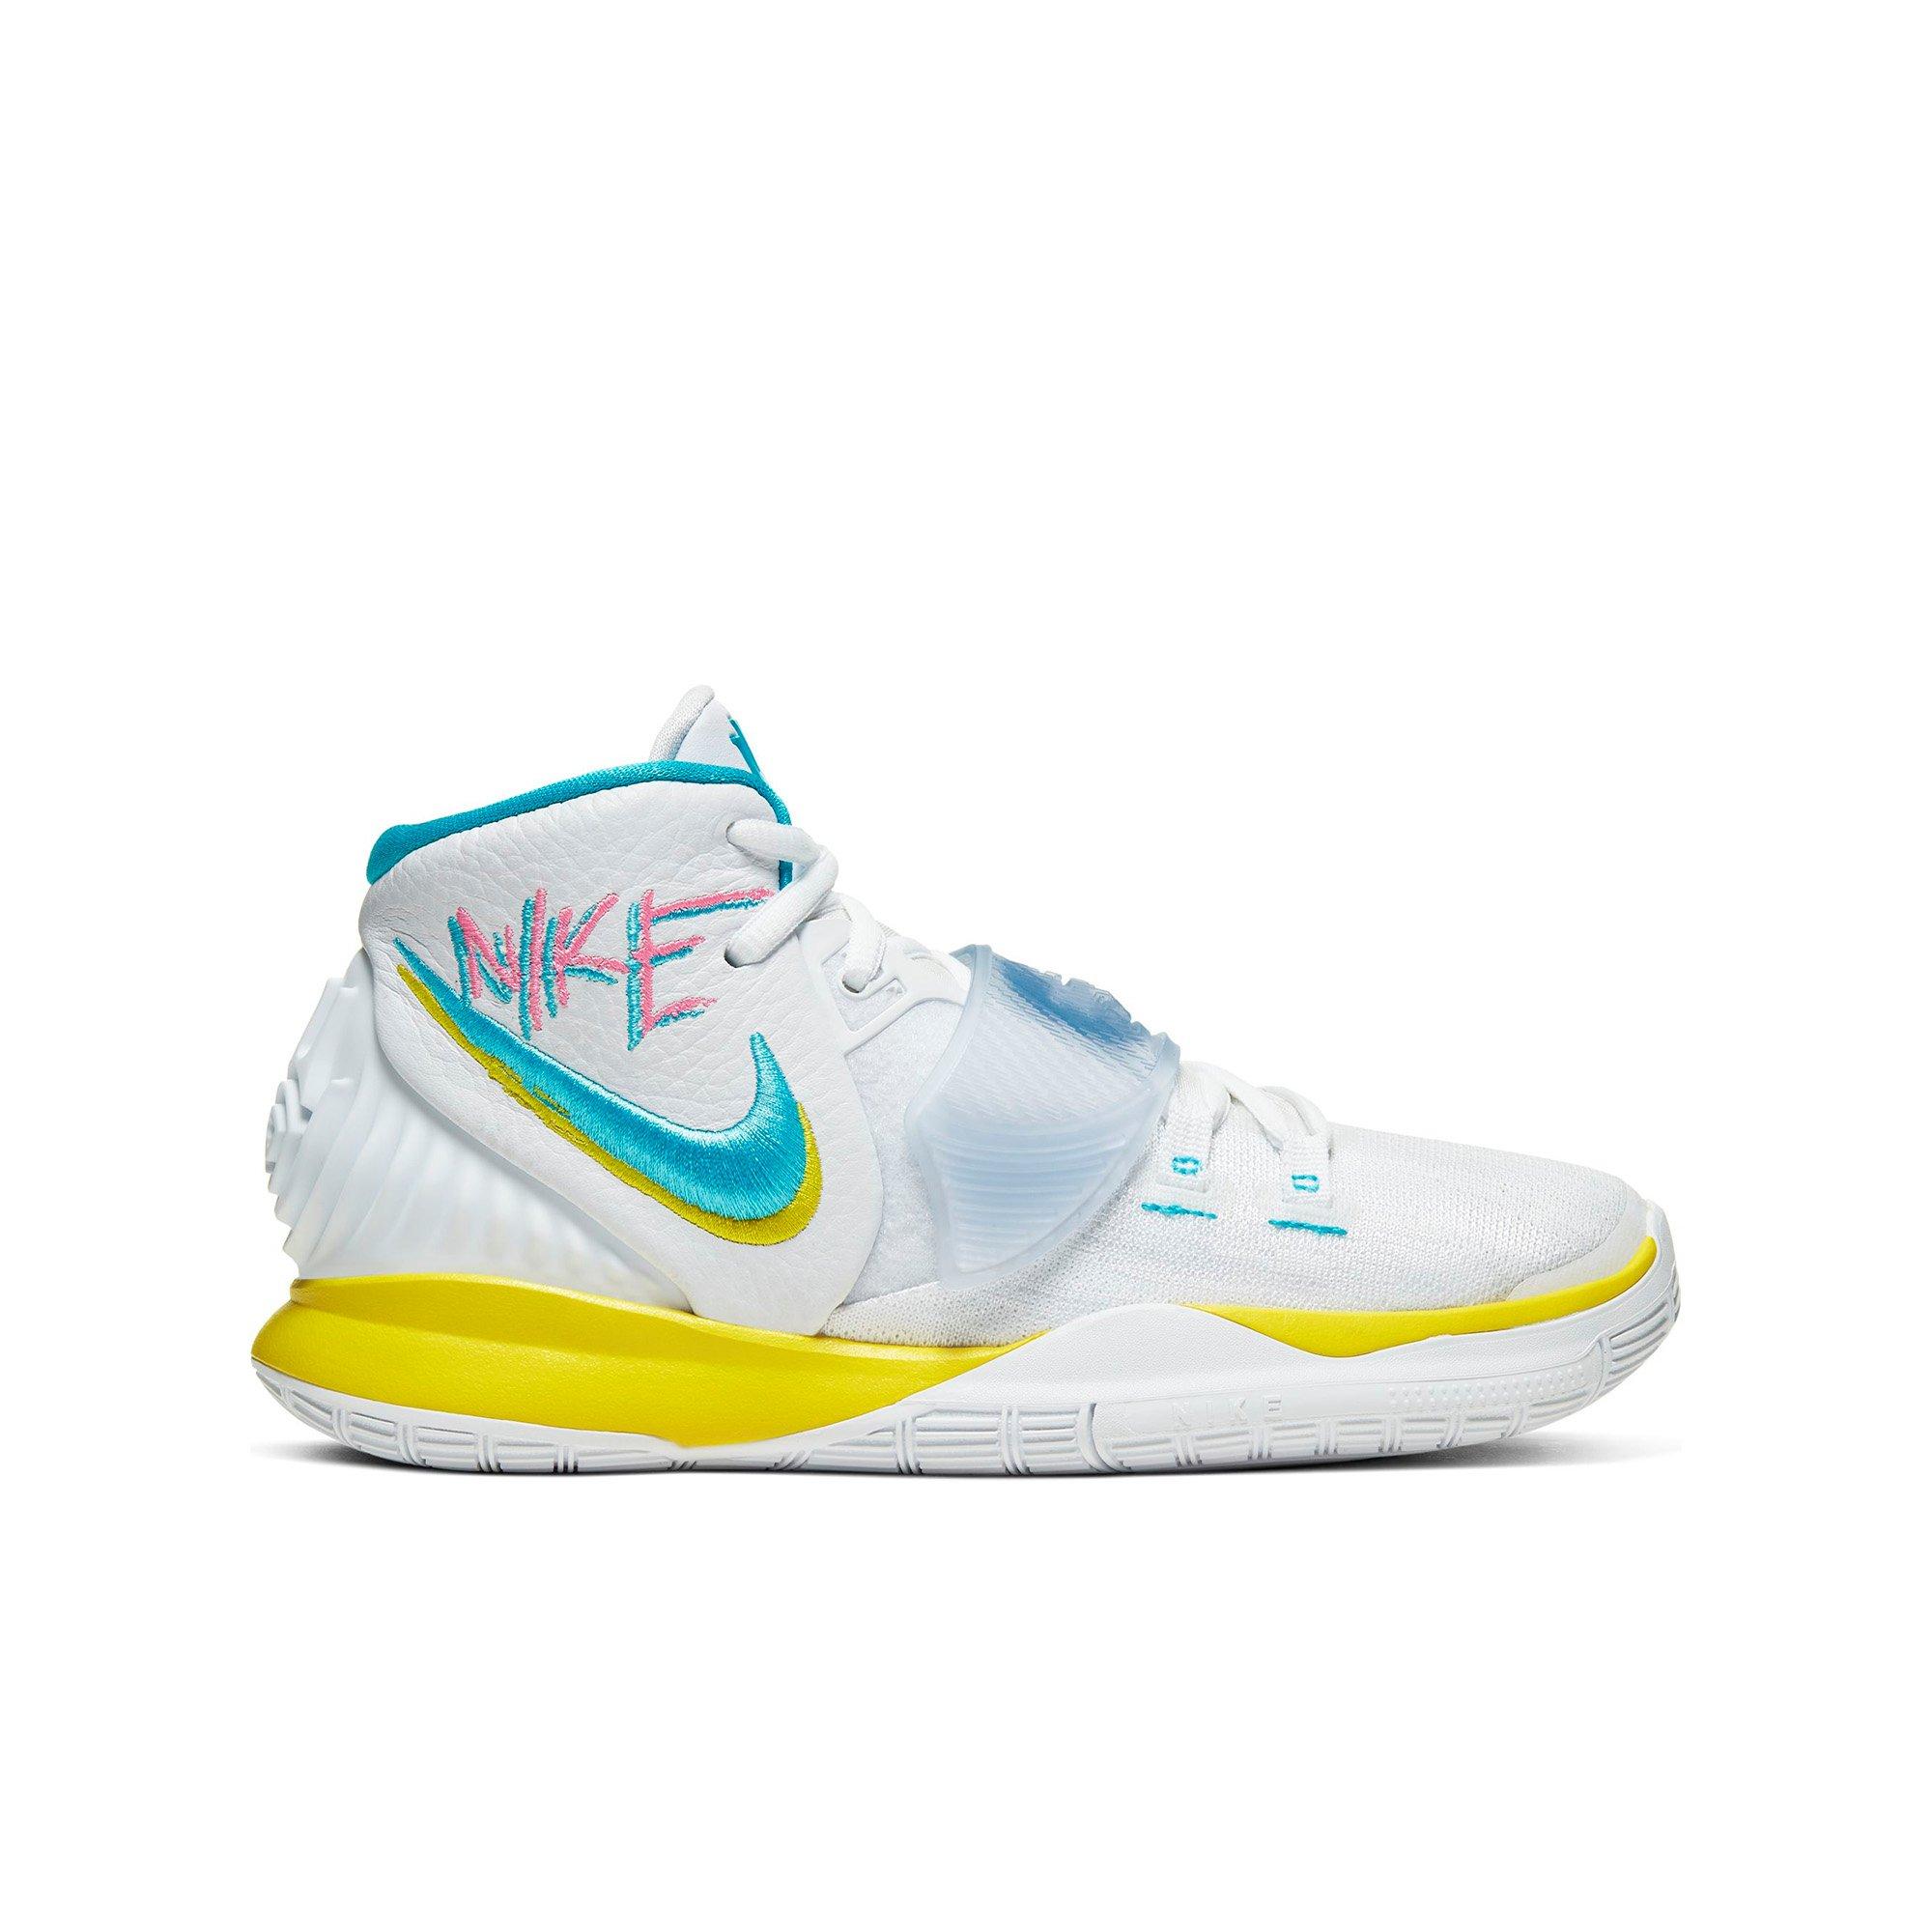 kyrie shoes blue and yellow